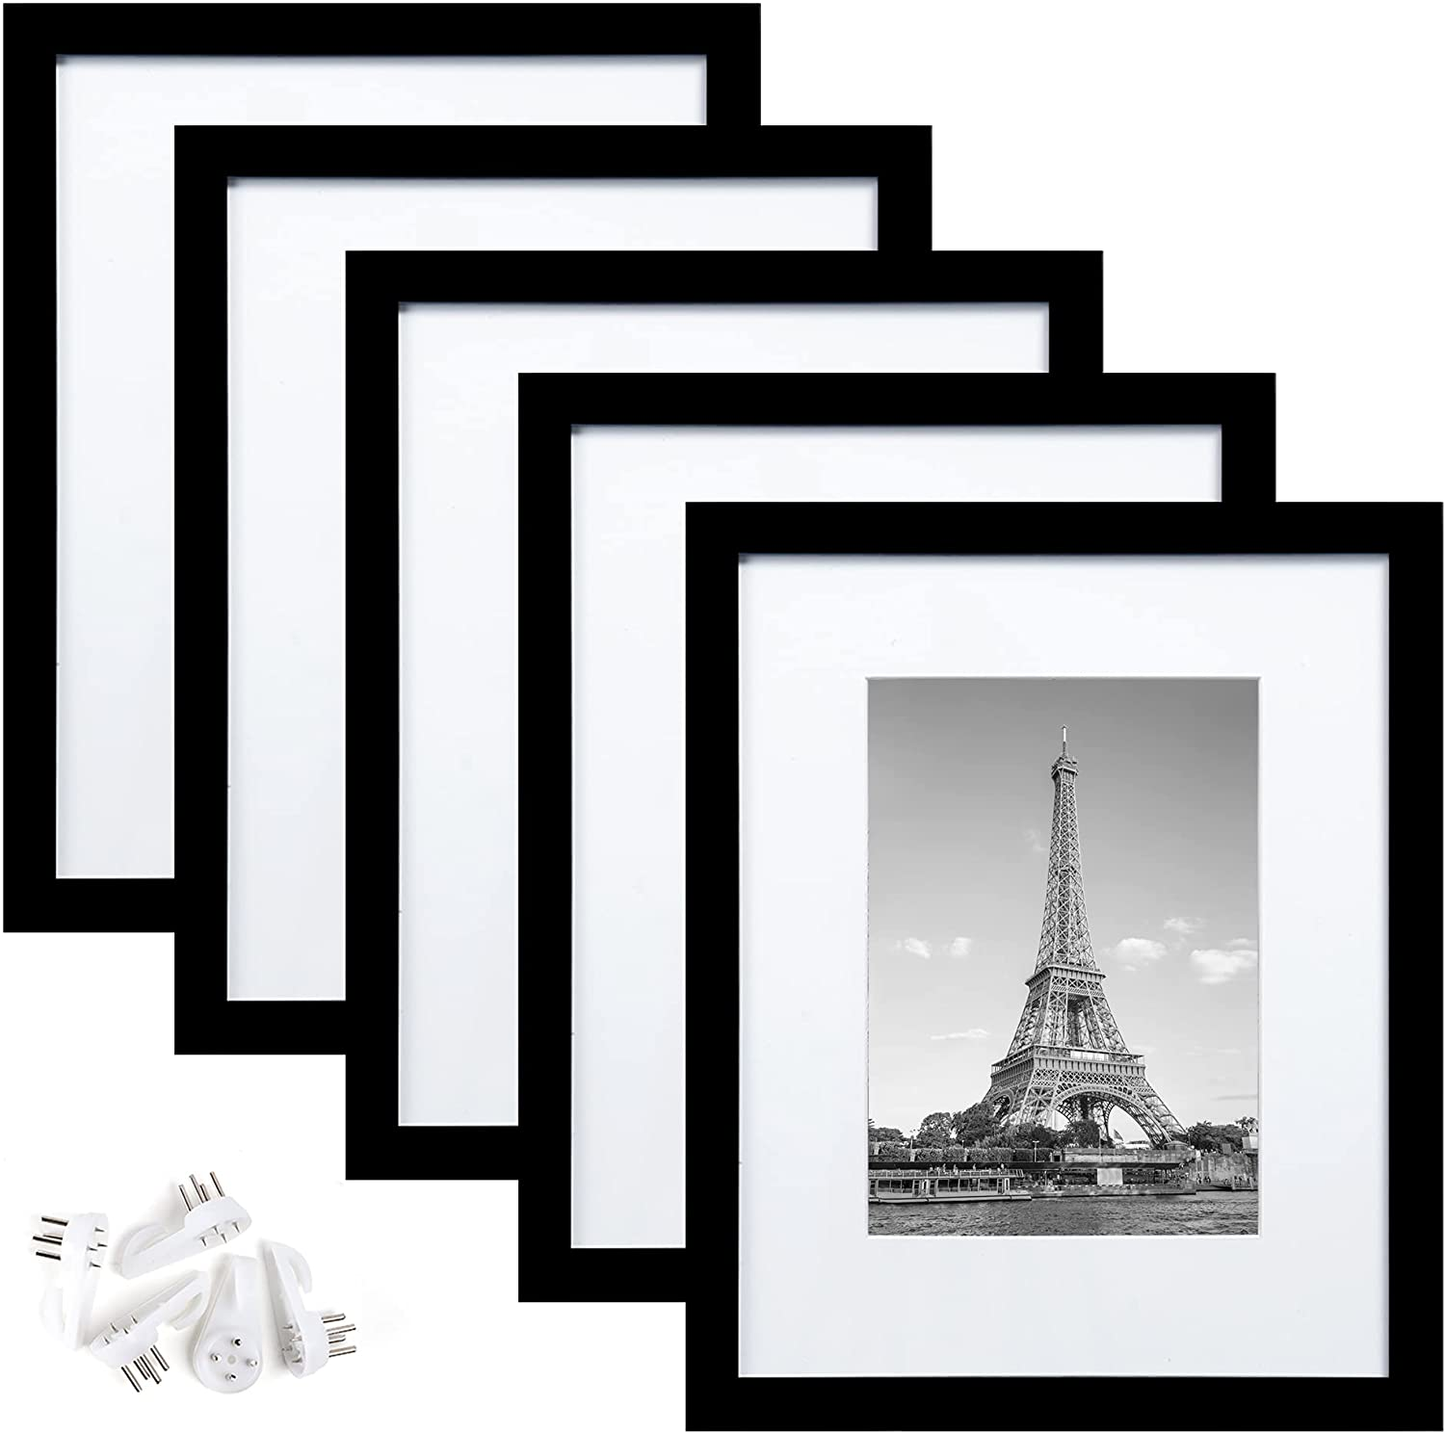 8X10 Picture Frame Set of 5,Display Pictures 5X7 with Mat or 8X10 without Mat,Wall Gallery Photo Frames,Black